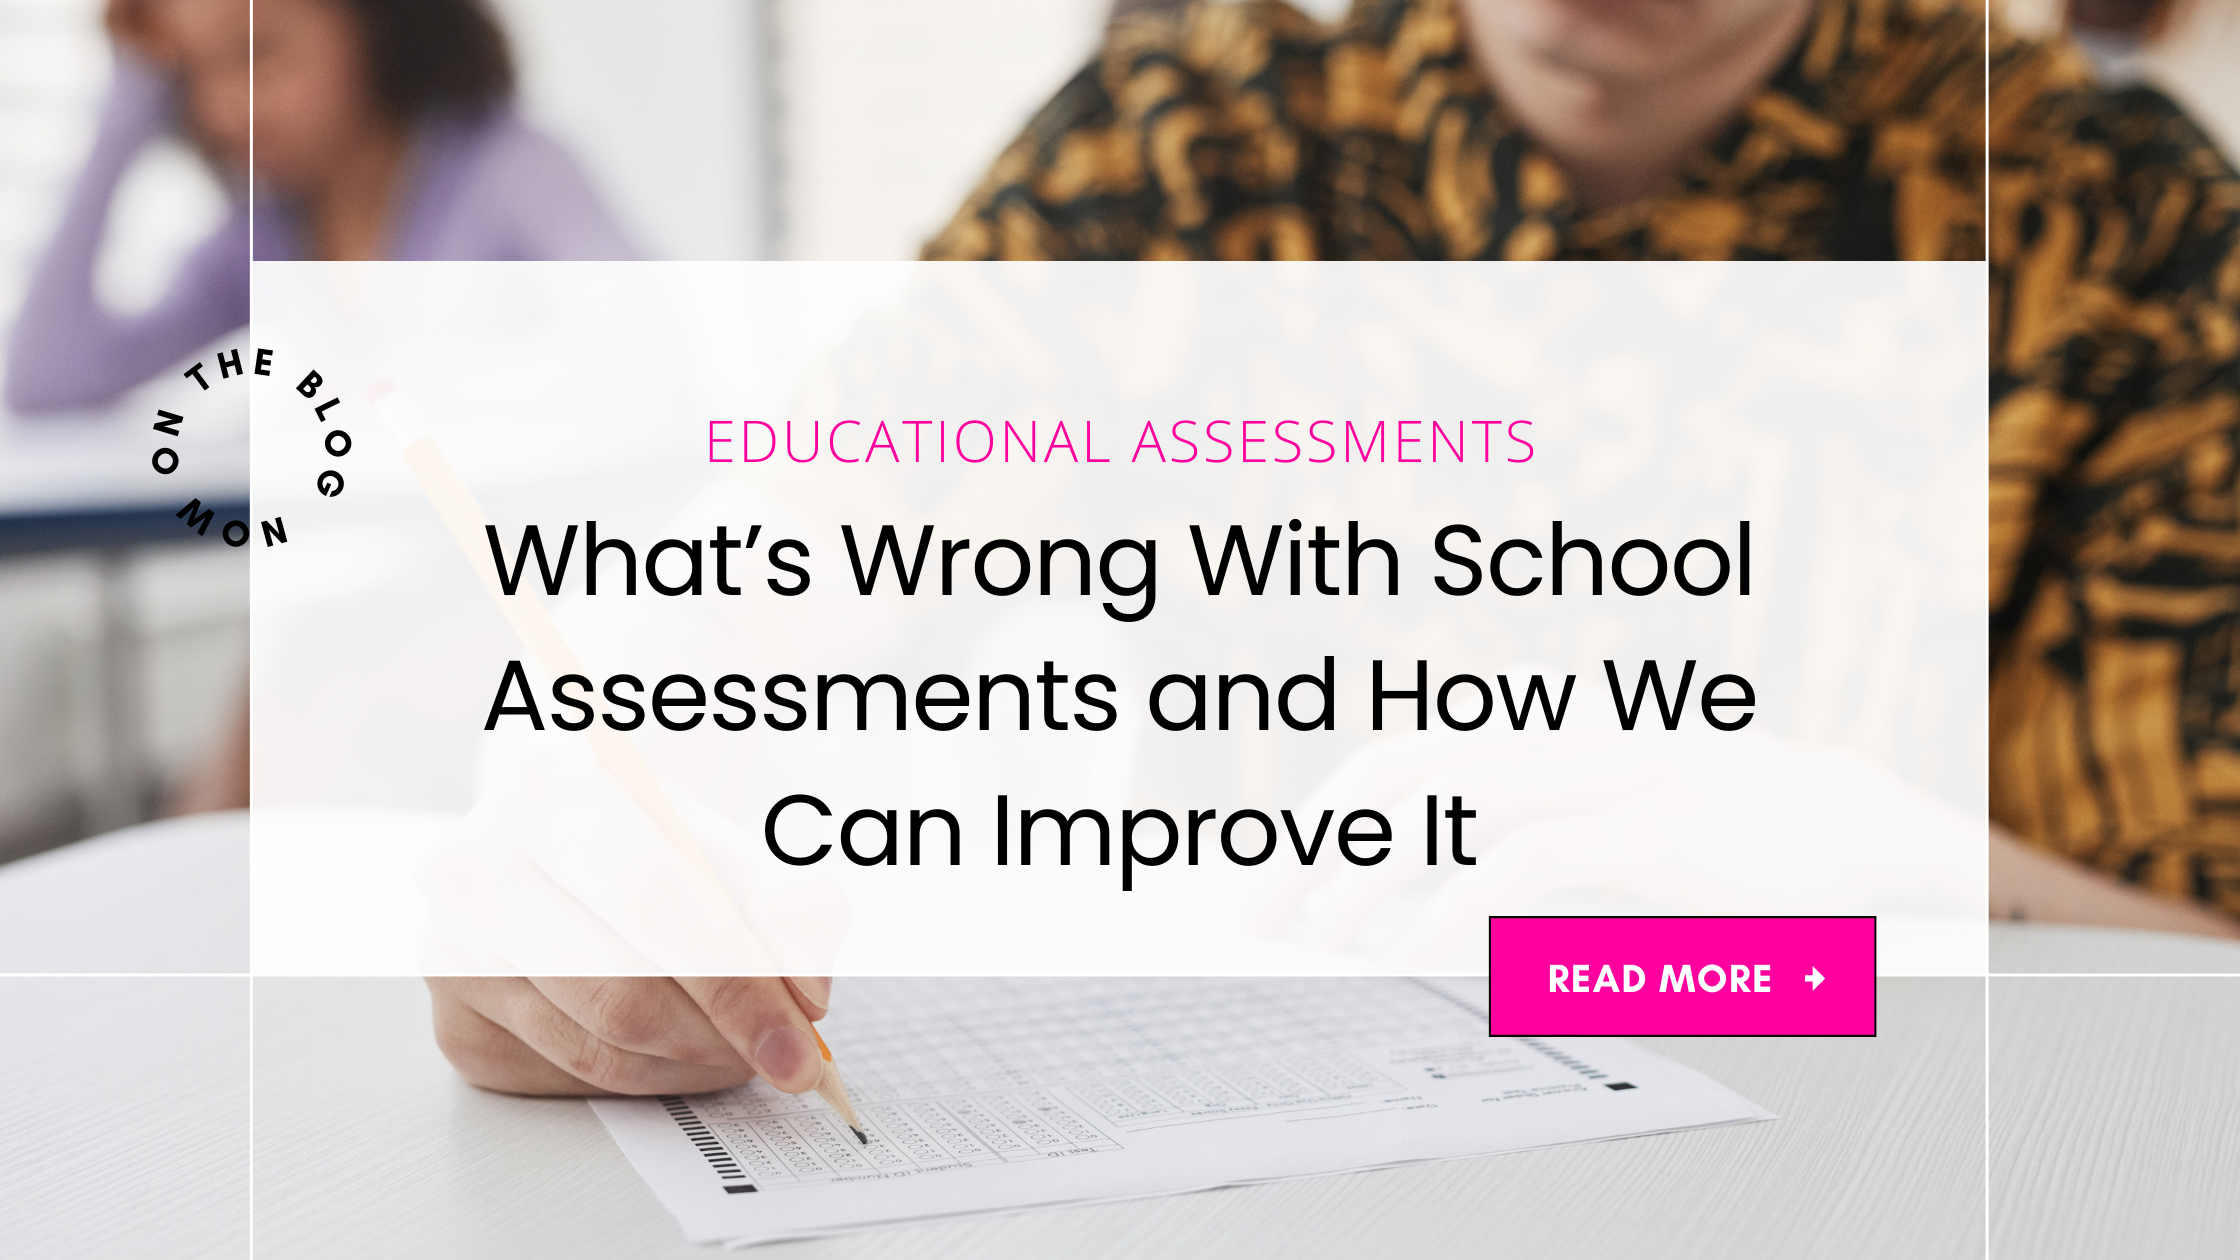 What’s Wrong With School Assessments and How We Can Improve It